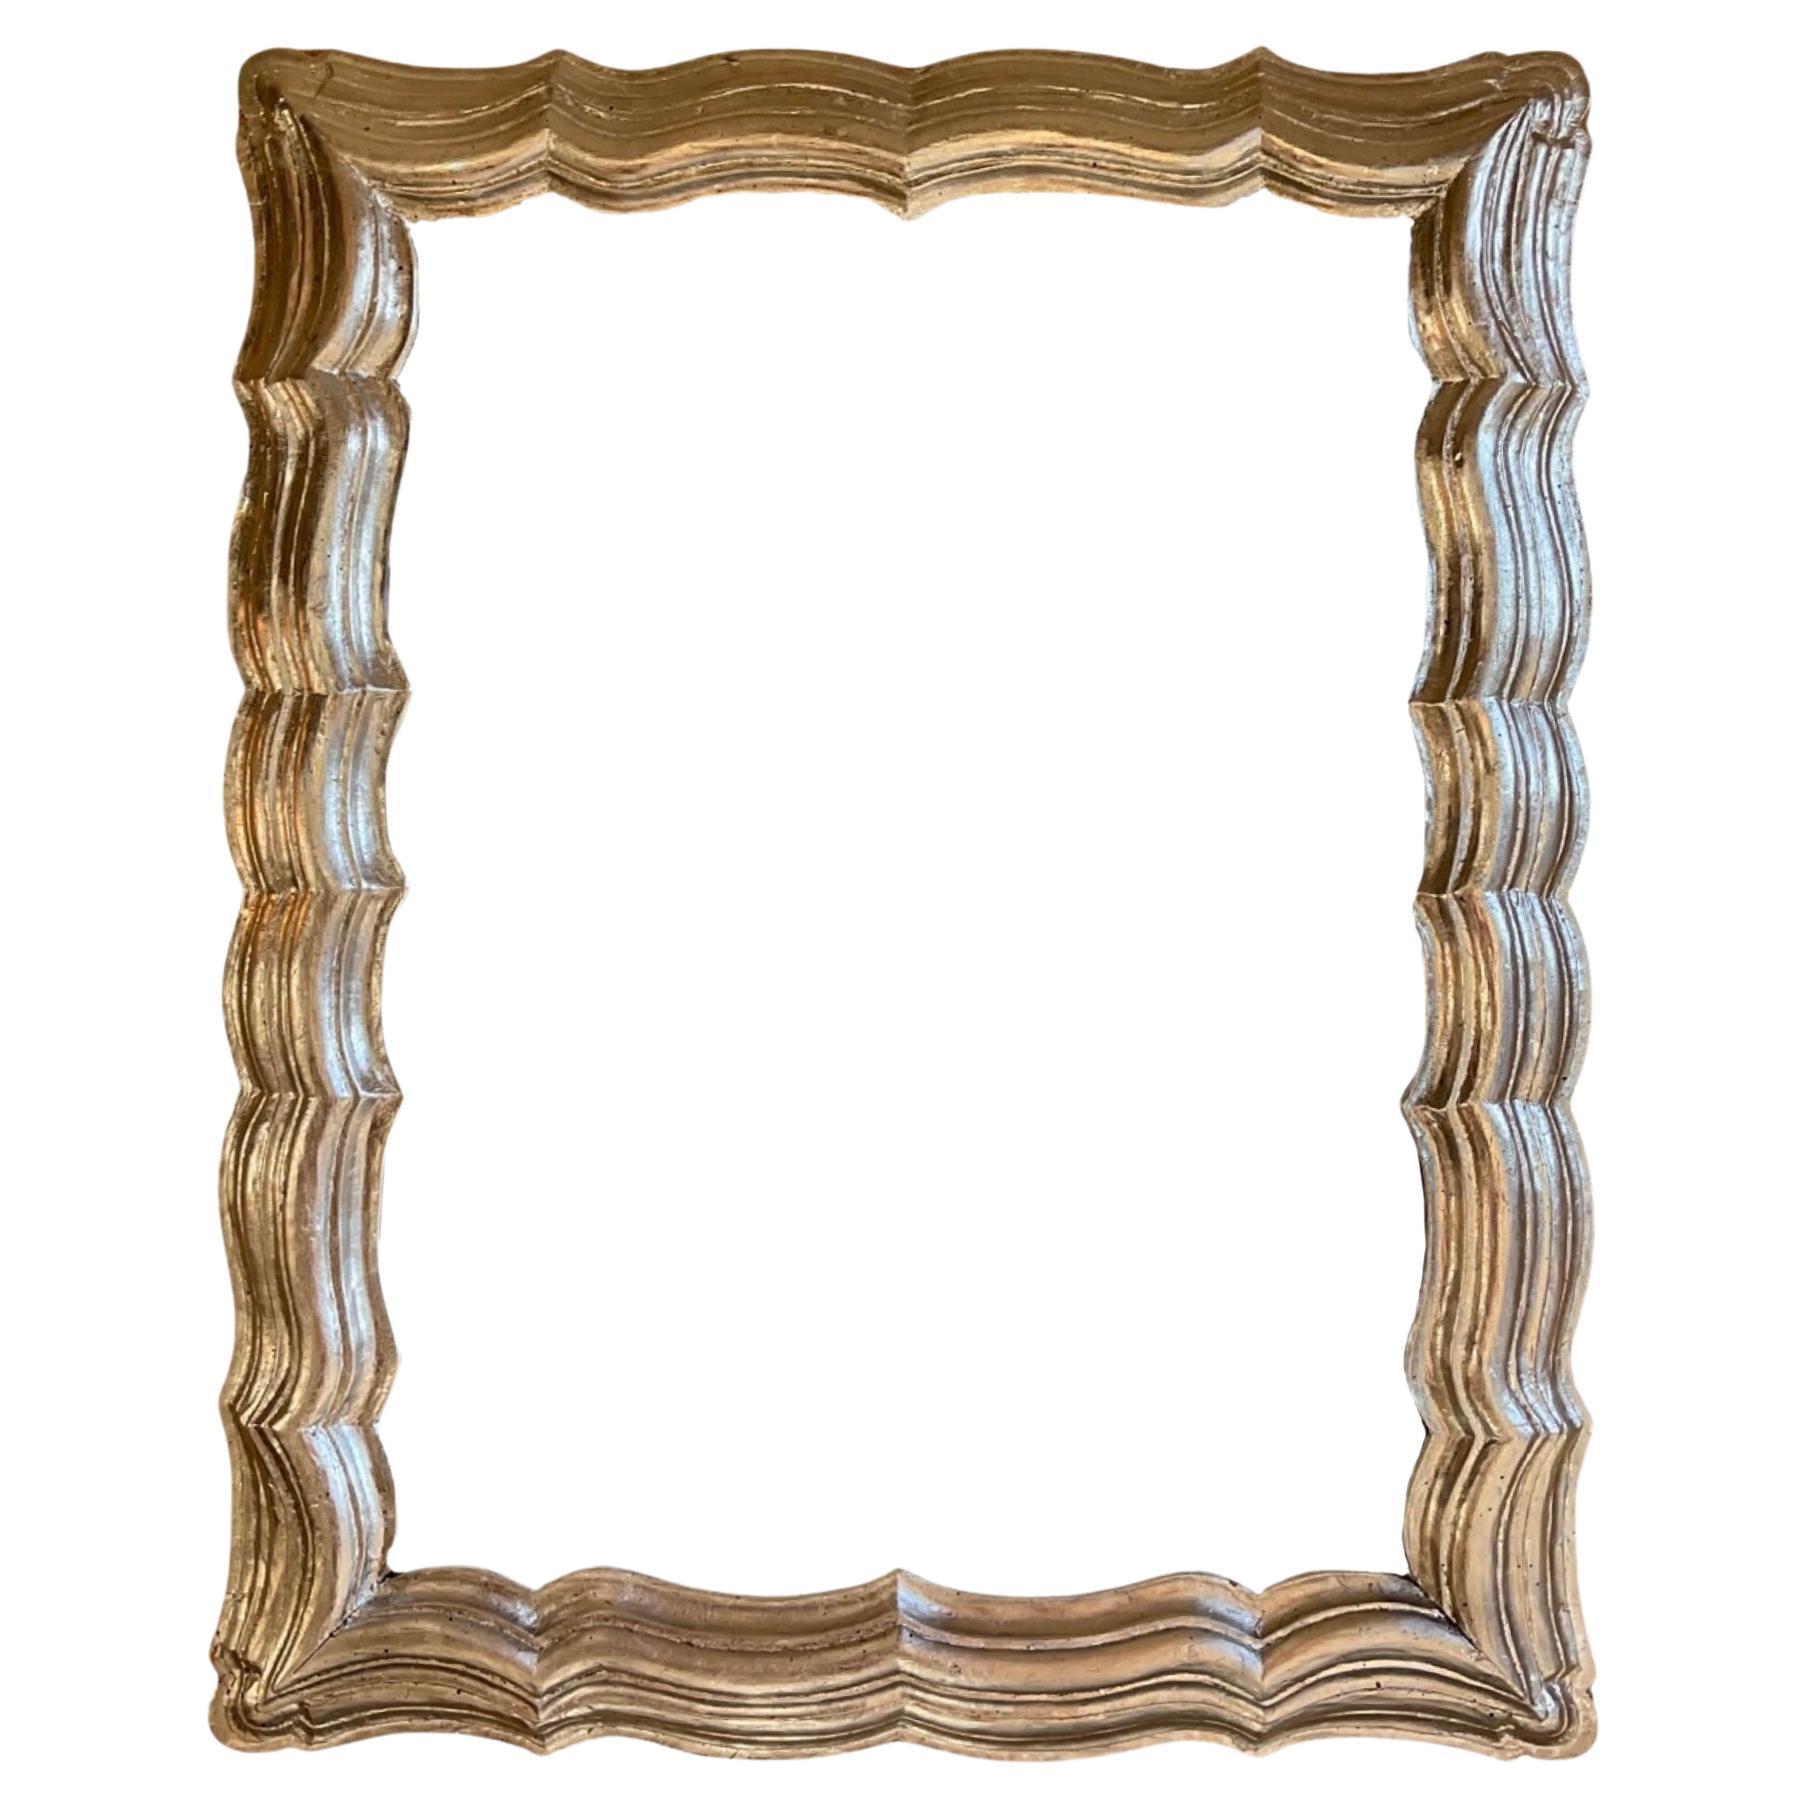 This 19th-century French Silver Leaf Oakwood Mirror radiates elegance with its silver leaf finish and sturdy oakwood construction. This authentic piece adds a touch of sophistication to any space, making it a timeless investment for your home.